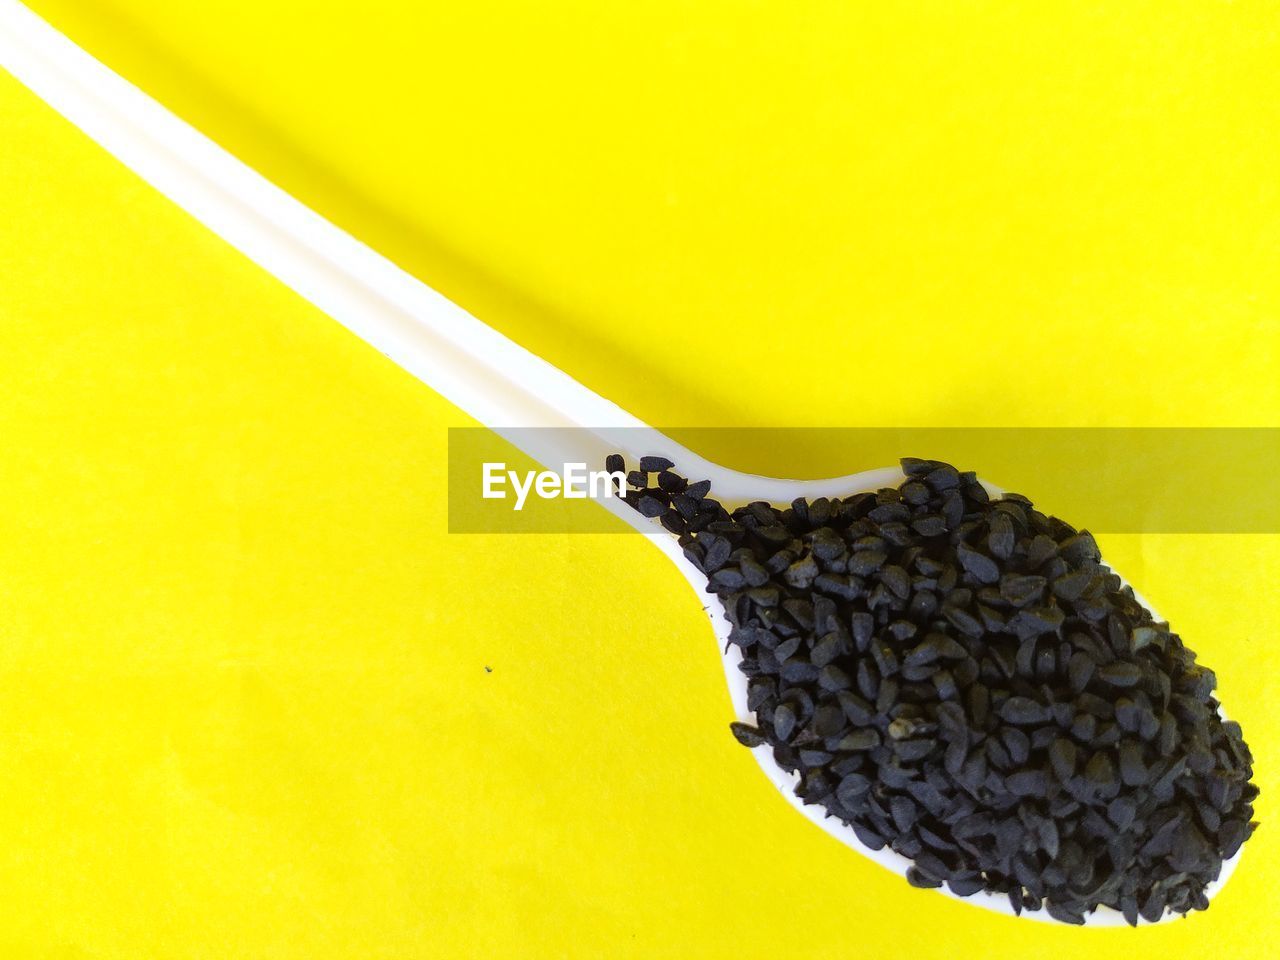 Black cumin seeds on spoon, yellow background.